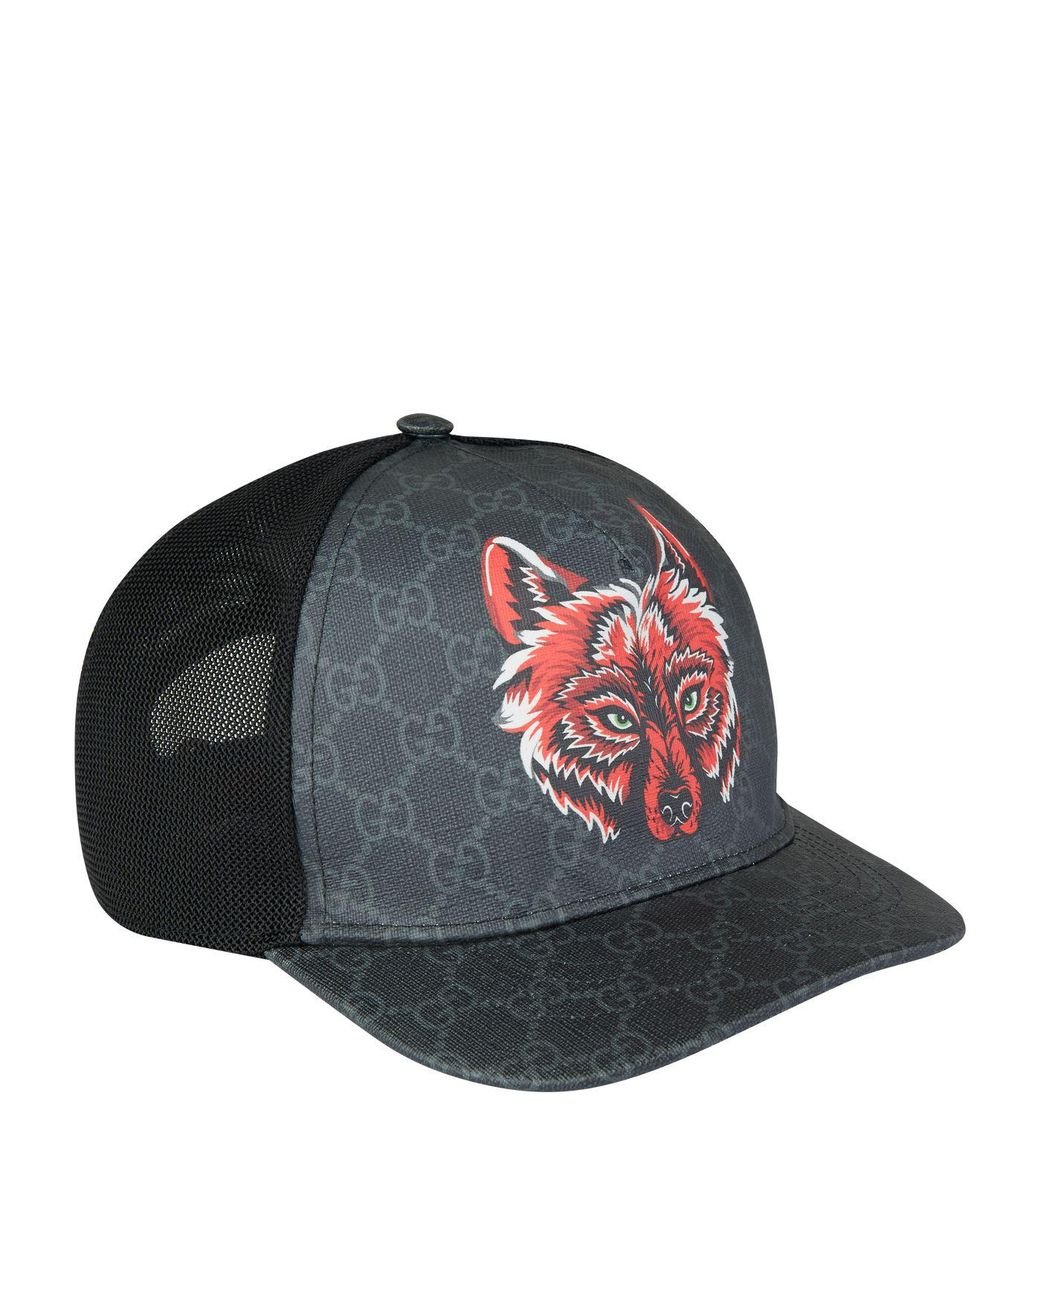 ZAP CLOTHING - New arrival online, Gucci GG supreme wolf head hat